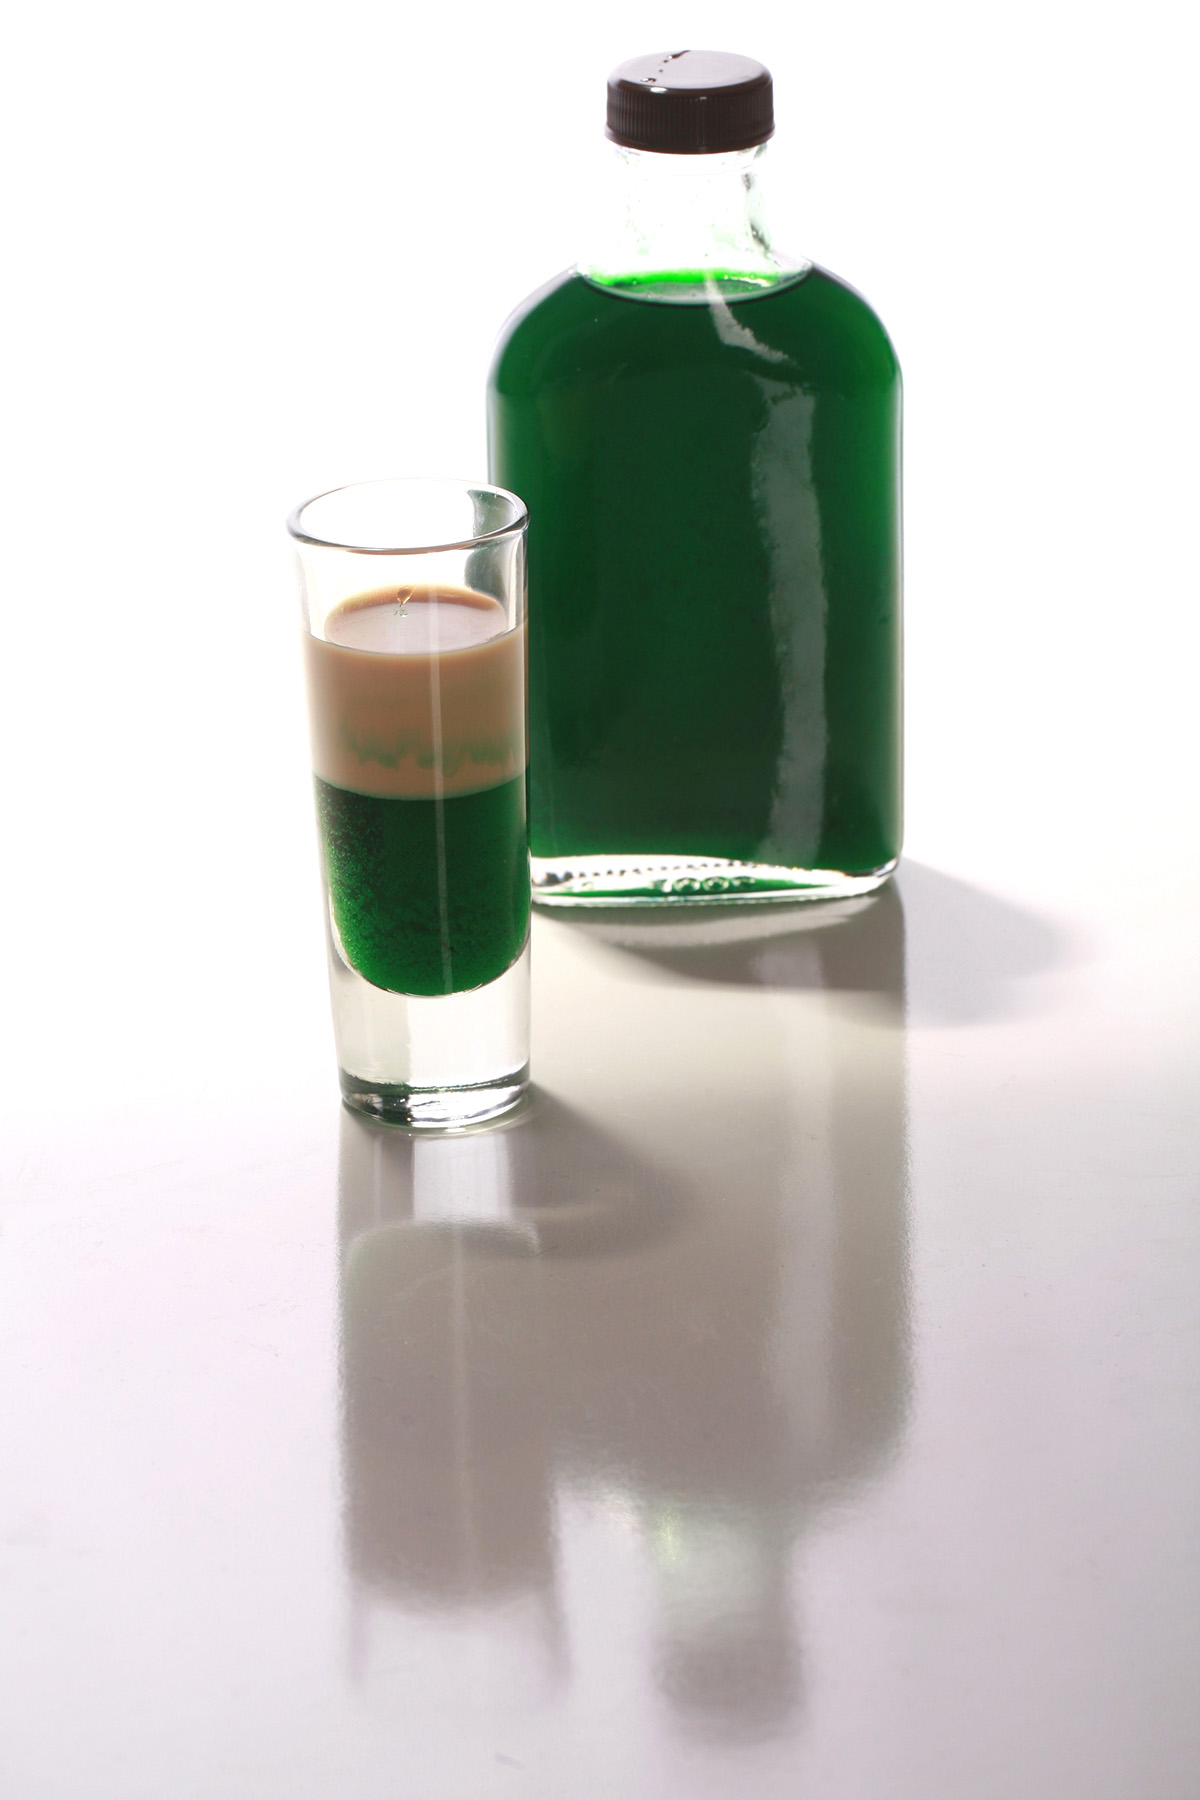 A layered shot glass of sugar-free creme de menthe and keto Irish cream in front of a small bottle of low carb creme de menthe.